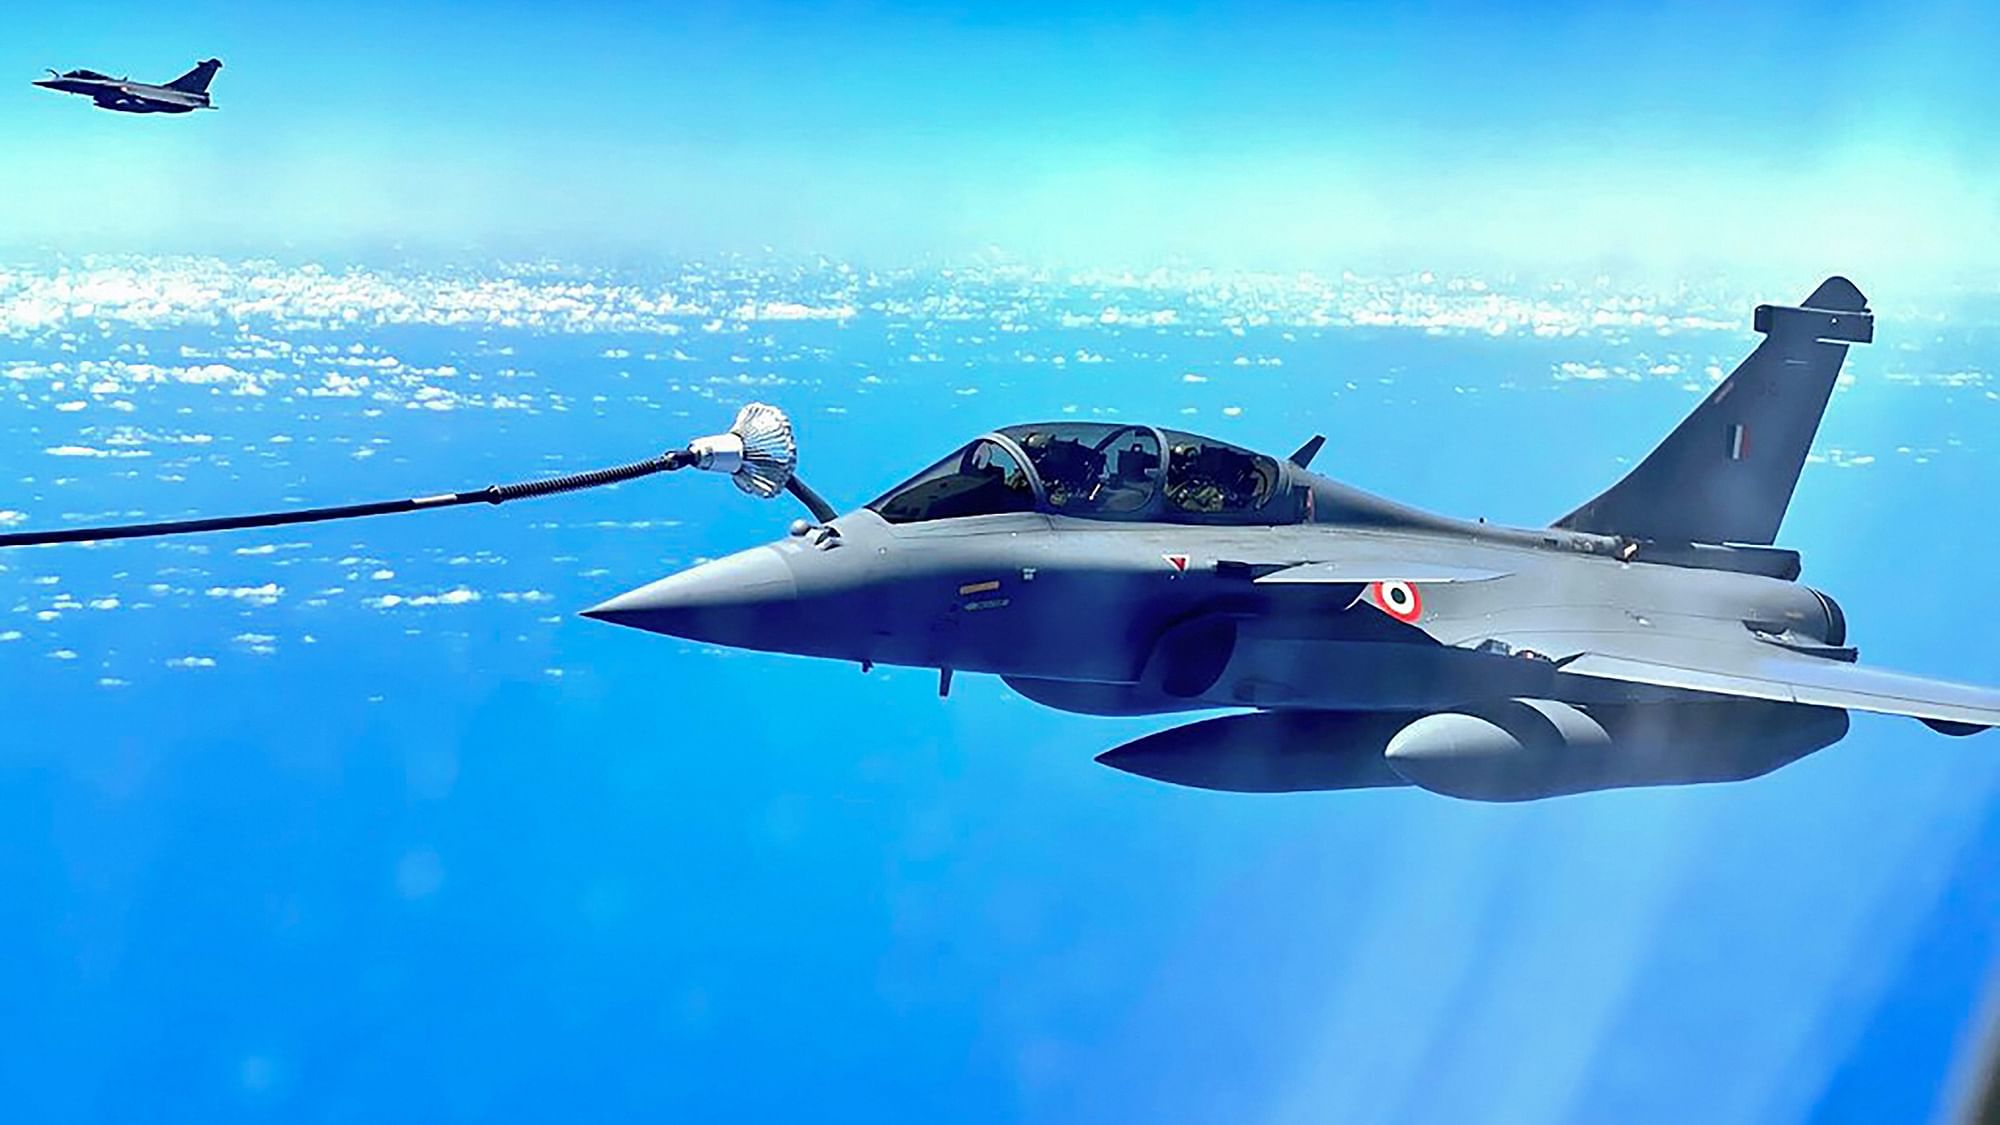 Images of the the Rafale fighter jets being refuelled mid-air, en route to Ambala.